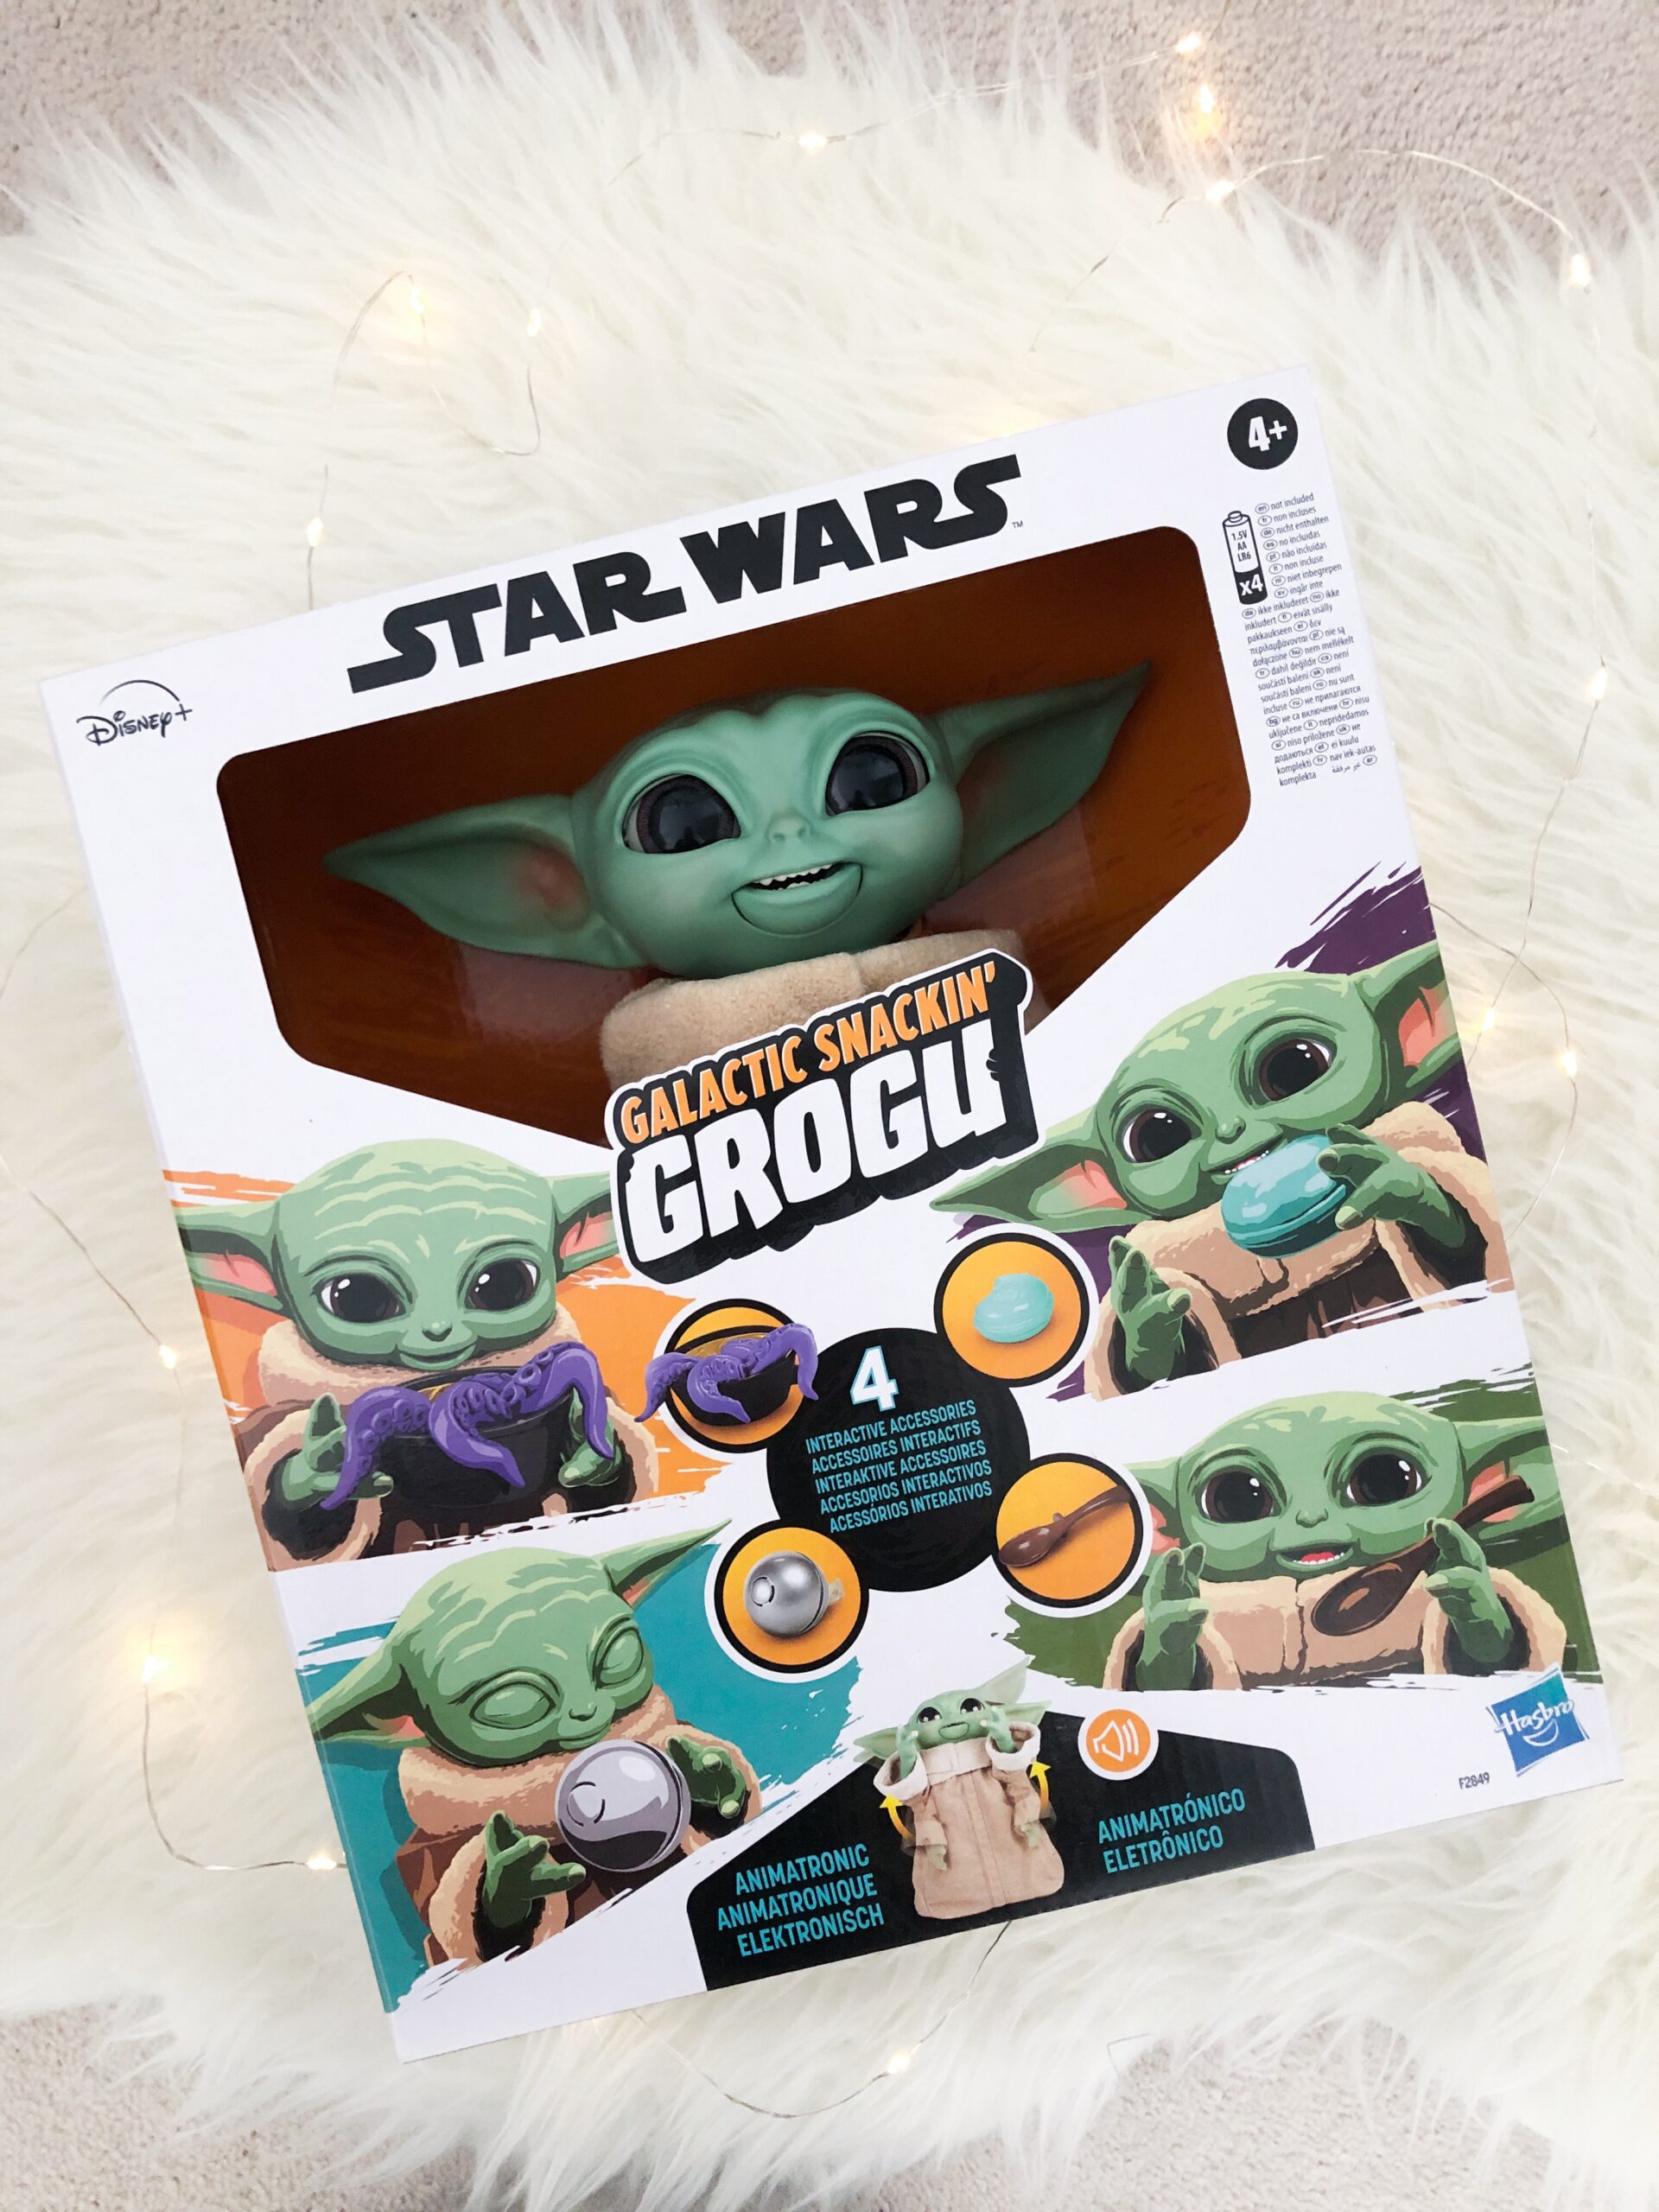 Hasbro Gift Guide for Kids on livin' Life with Style- star wars yoda